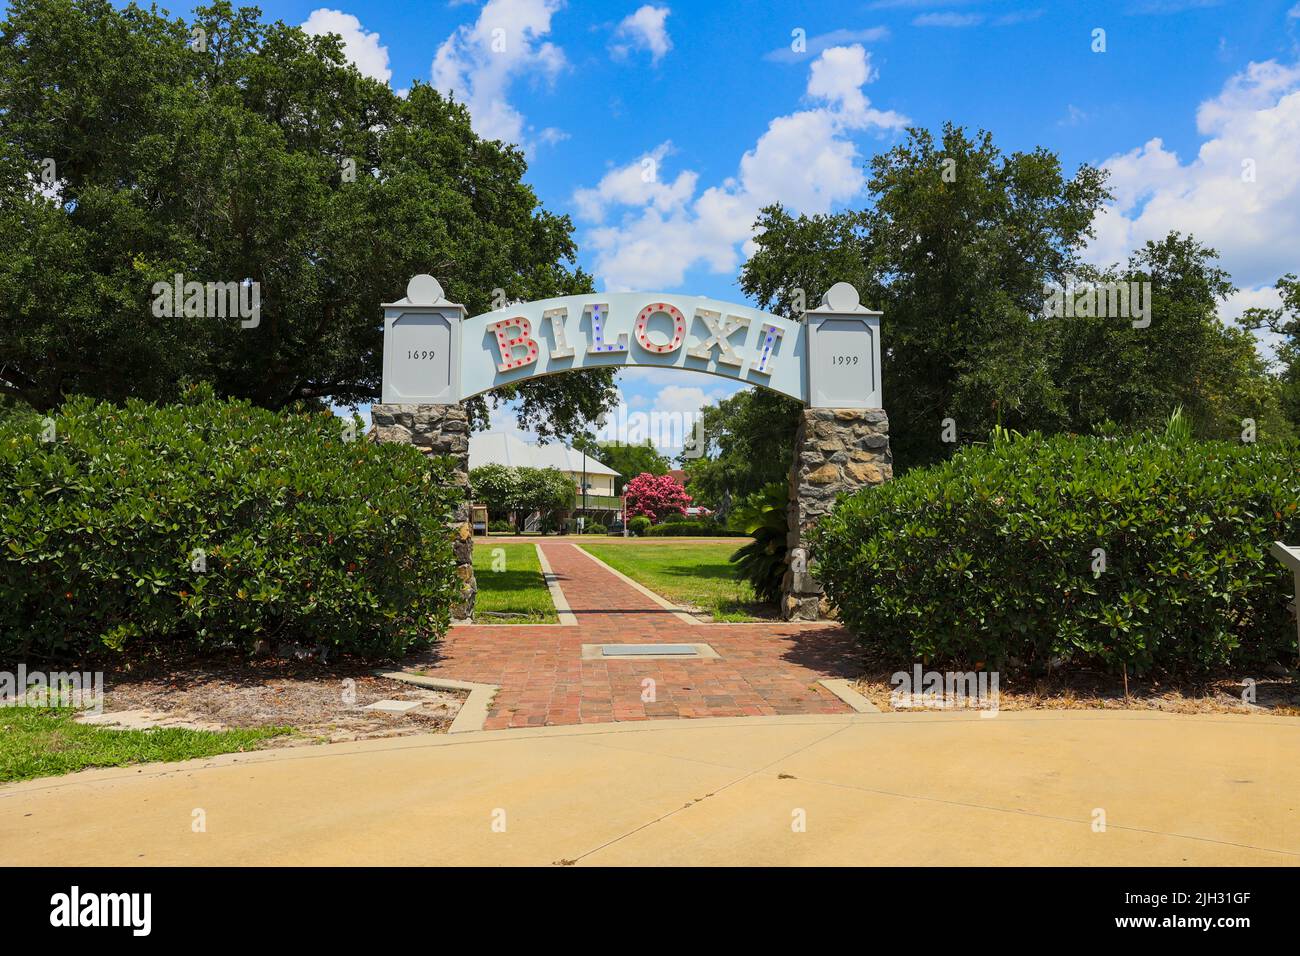 Biloxi, MS - June 18, 2022: Biloxi sign at the entrance to the Town Green area. Stock Photo